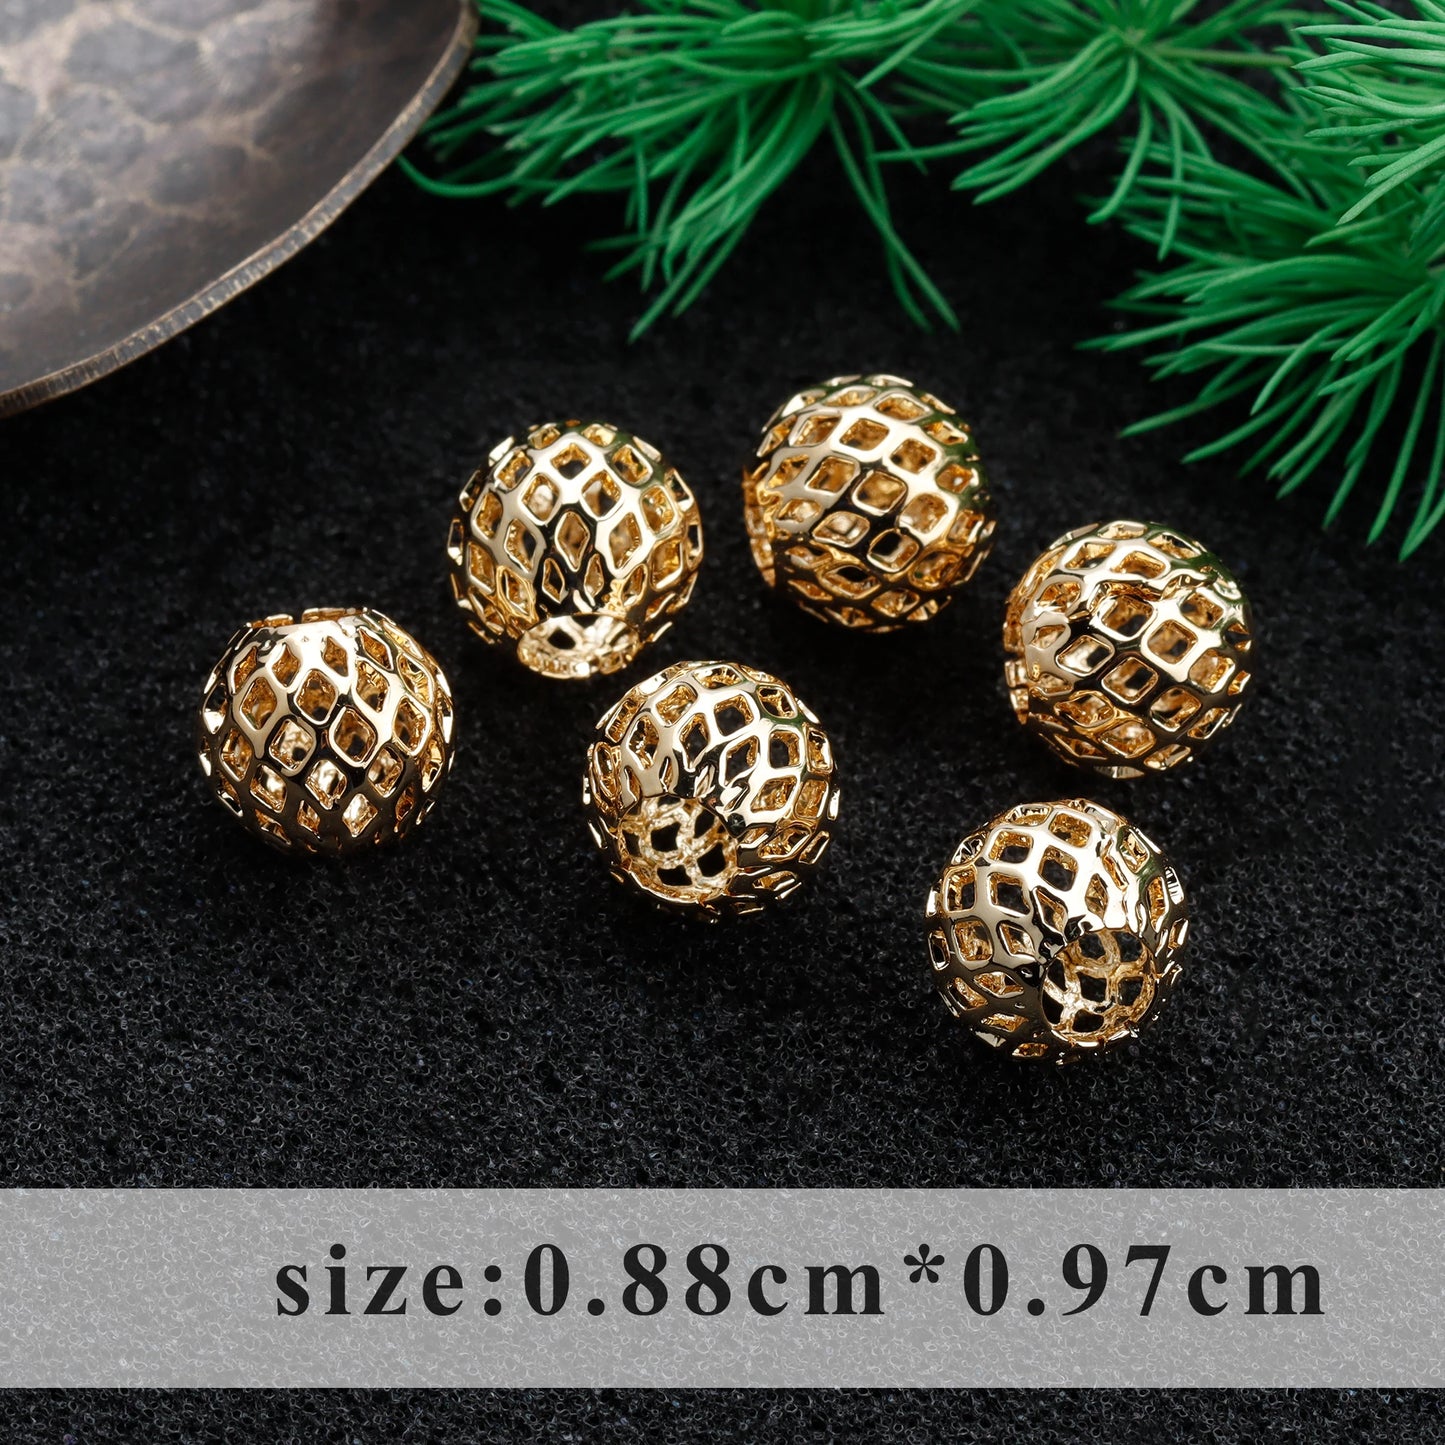 GUFEATHER M905,jewelry accessories,pass REACH,nickel free,18k gold plated,copper,charms,diy earrings,jewelry making,20pcs/lot